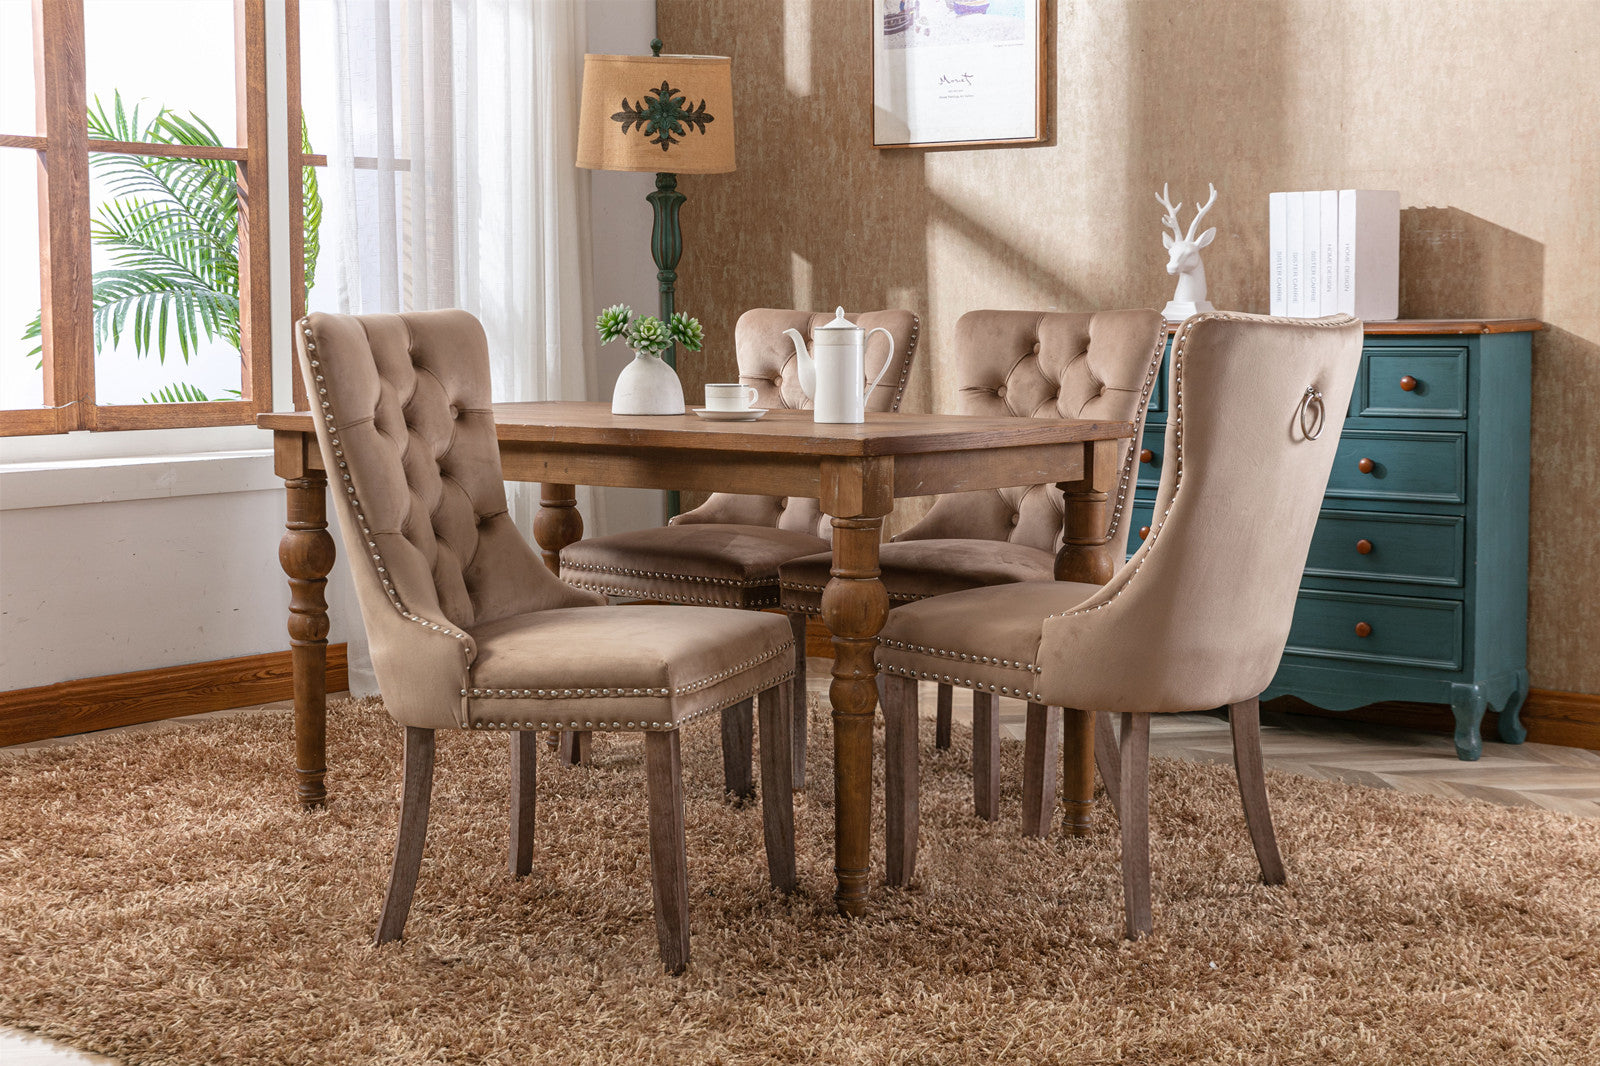 High-end Tufted Solid Wood Contemporary Velvet Upholstered Dining Chair with Wood Legs Nailhead Trim 2-Pcs Set, Khaki